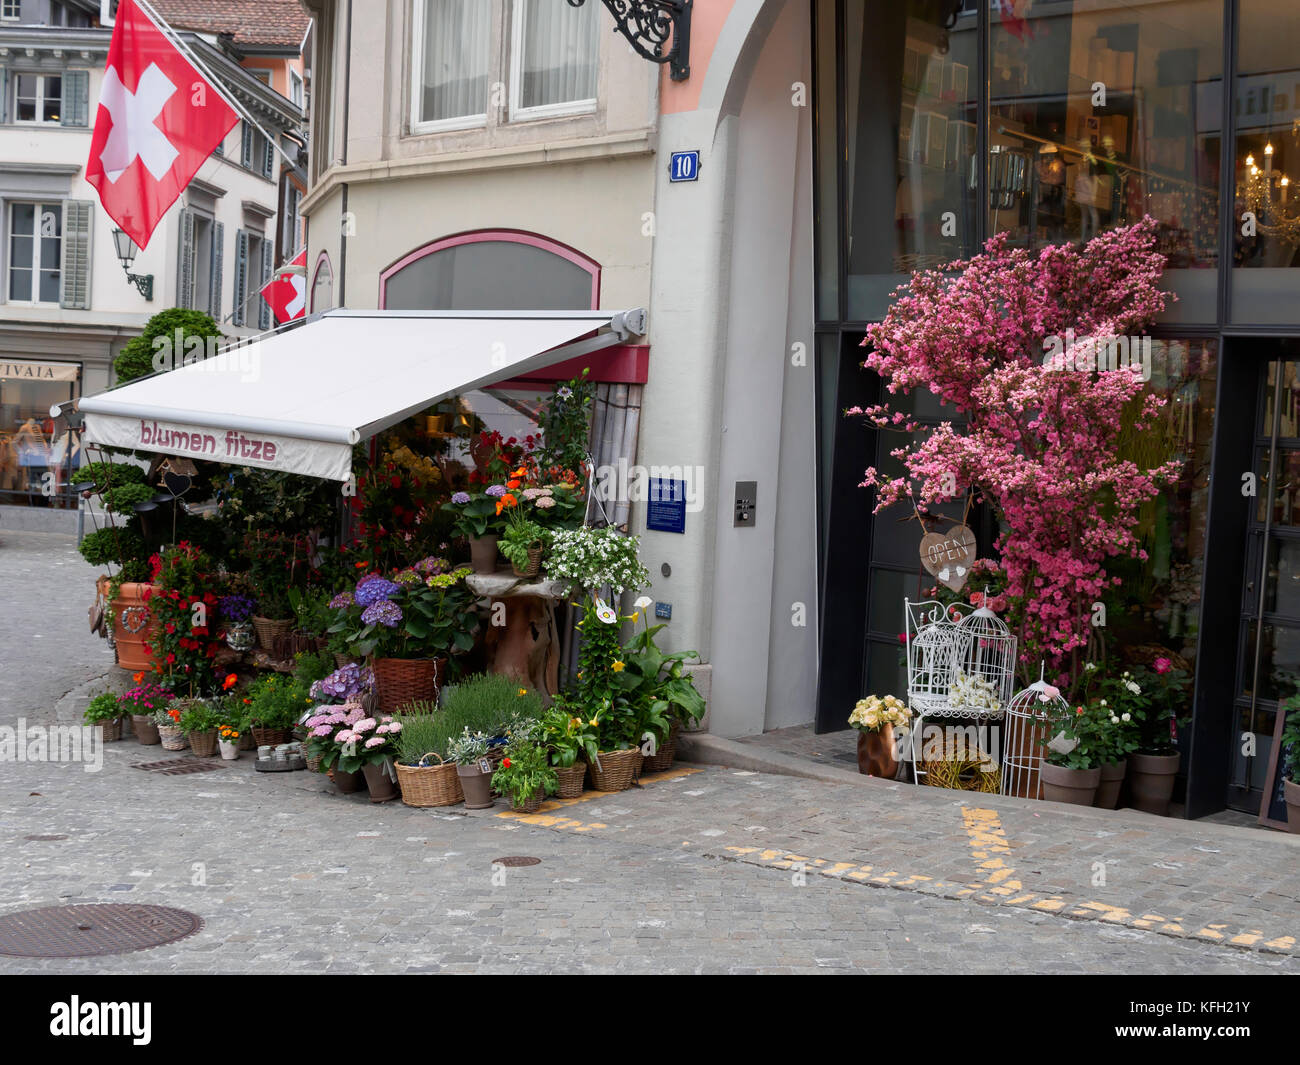 Kiosk Switzerland High Resolution Stock Photography and Images - Alamy